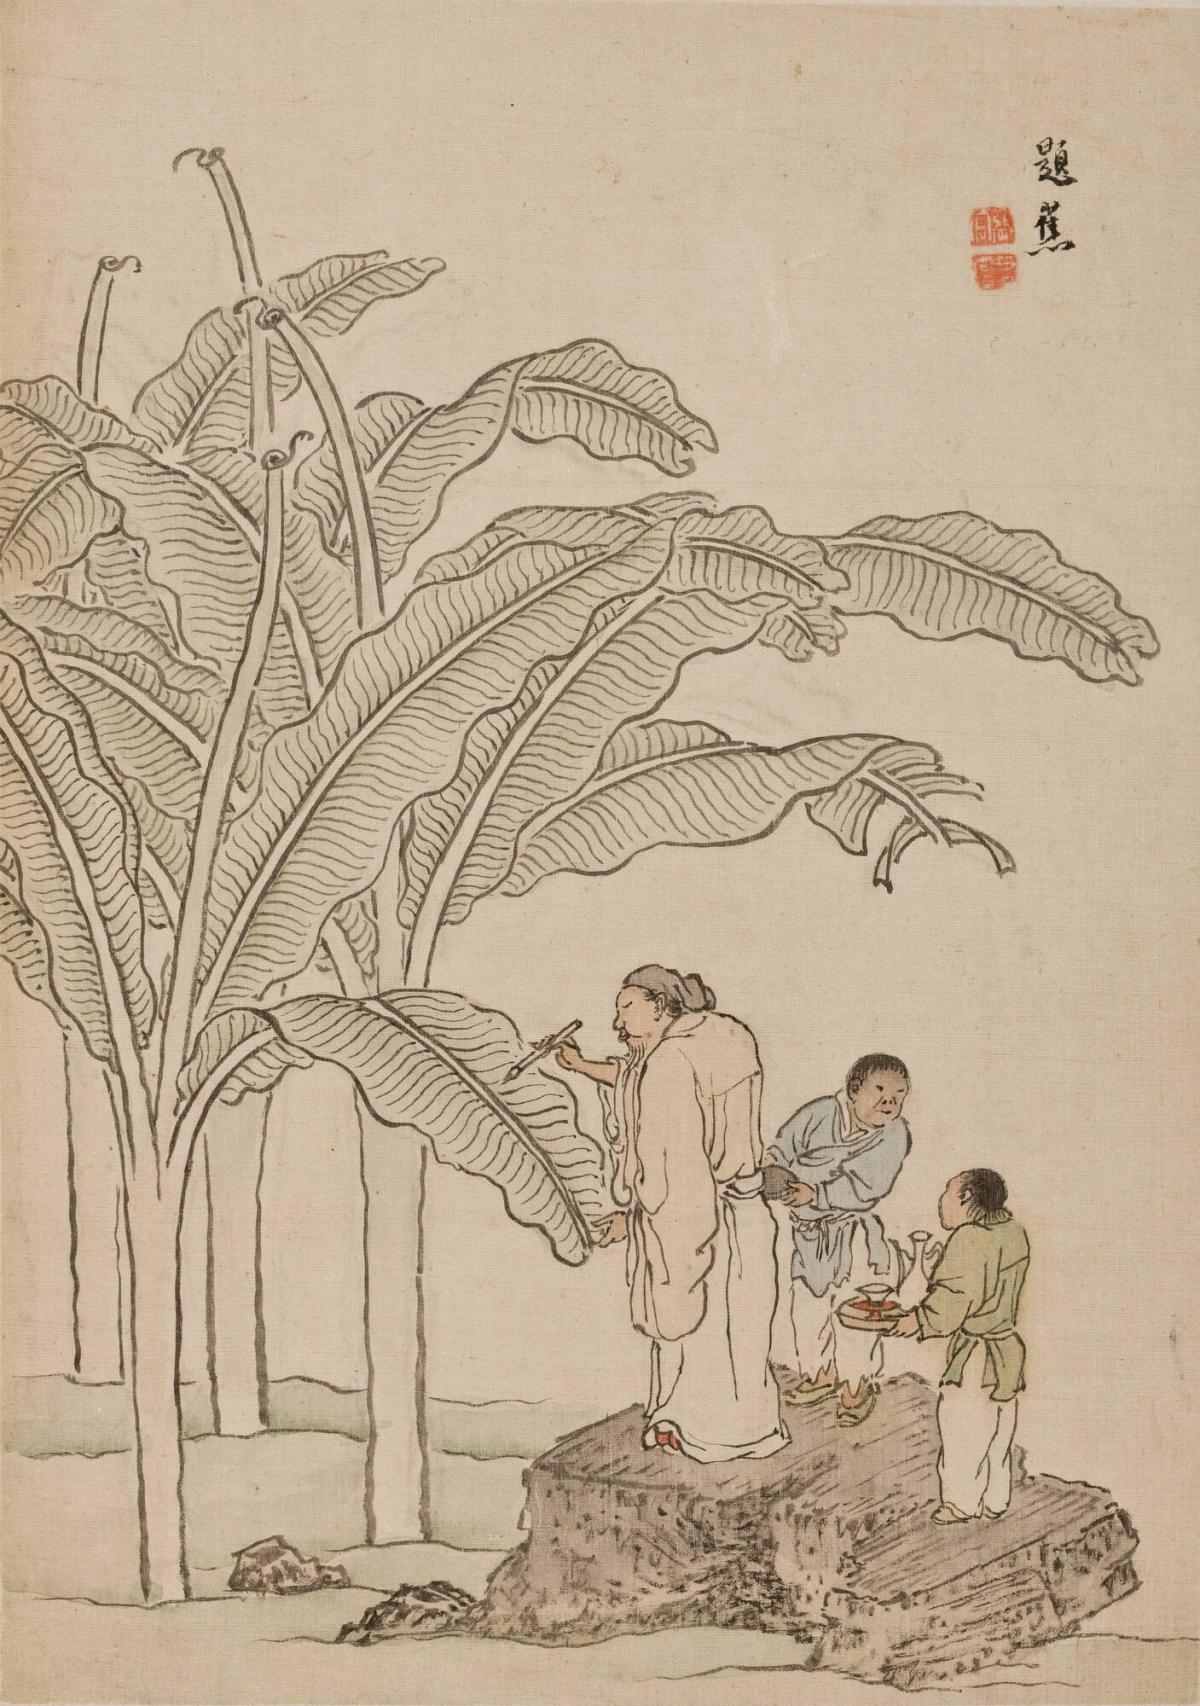 Inscribing a Banana Leaf, from the album Figures in Settings